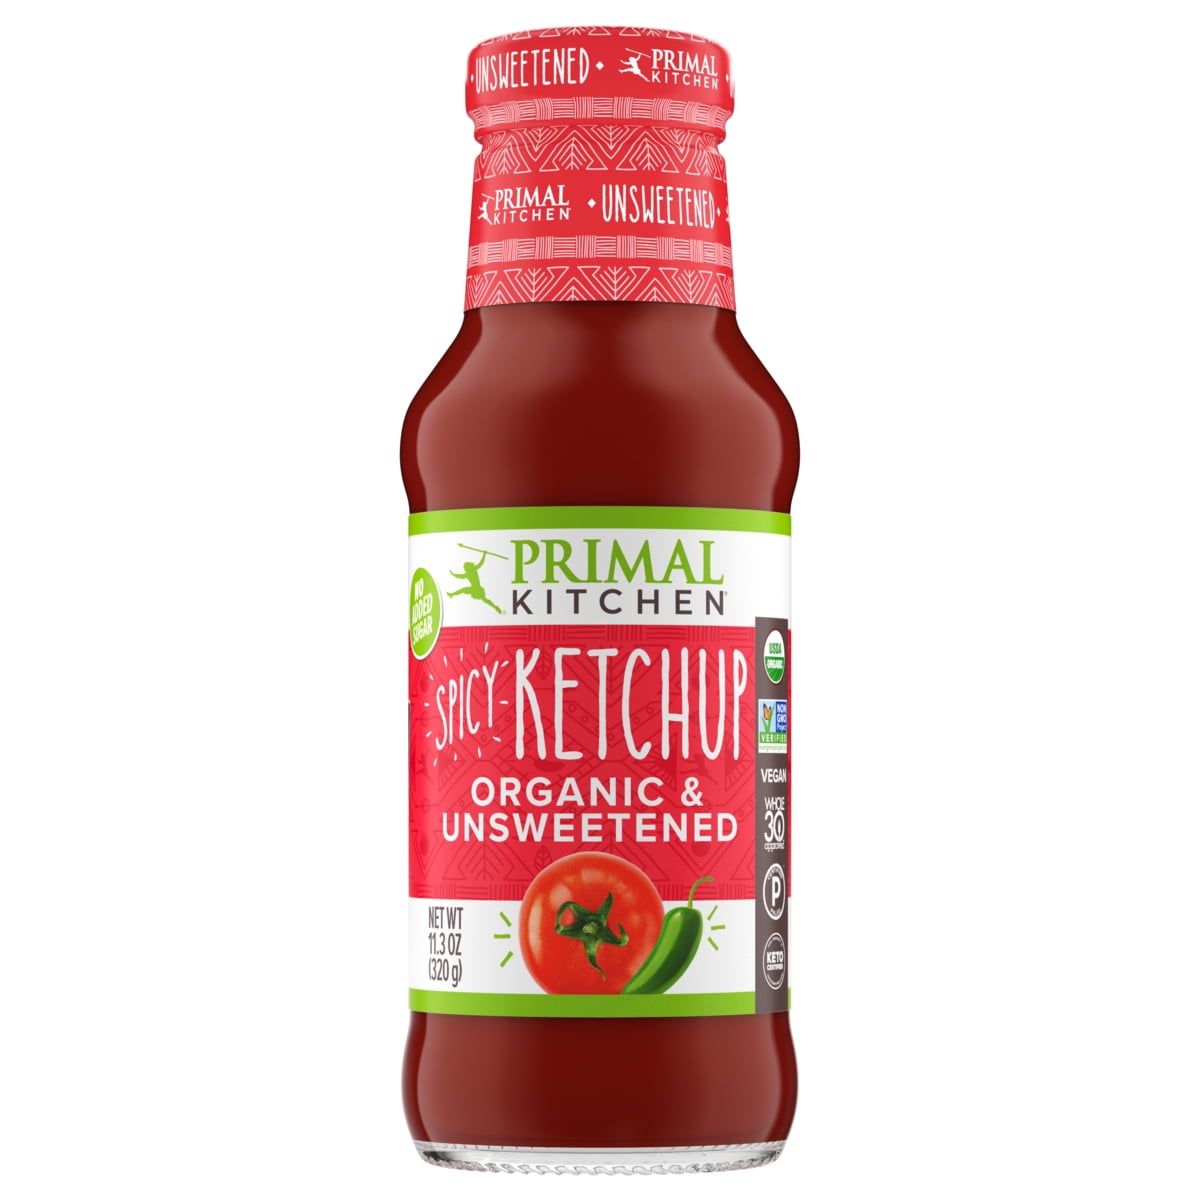  Primal Kitchen Spicy Ketchup Organic and Unsweetened